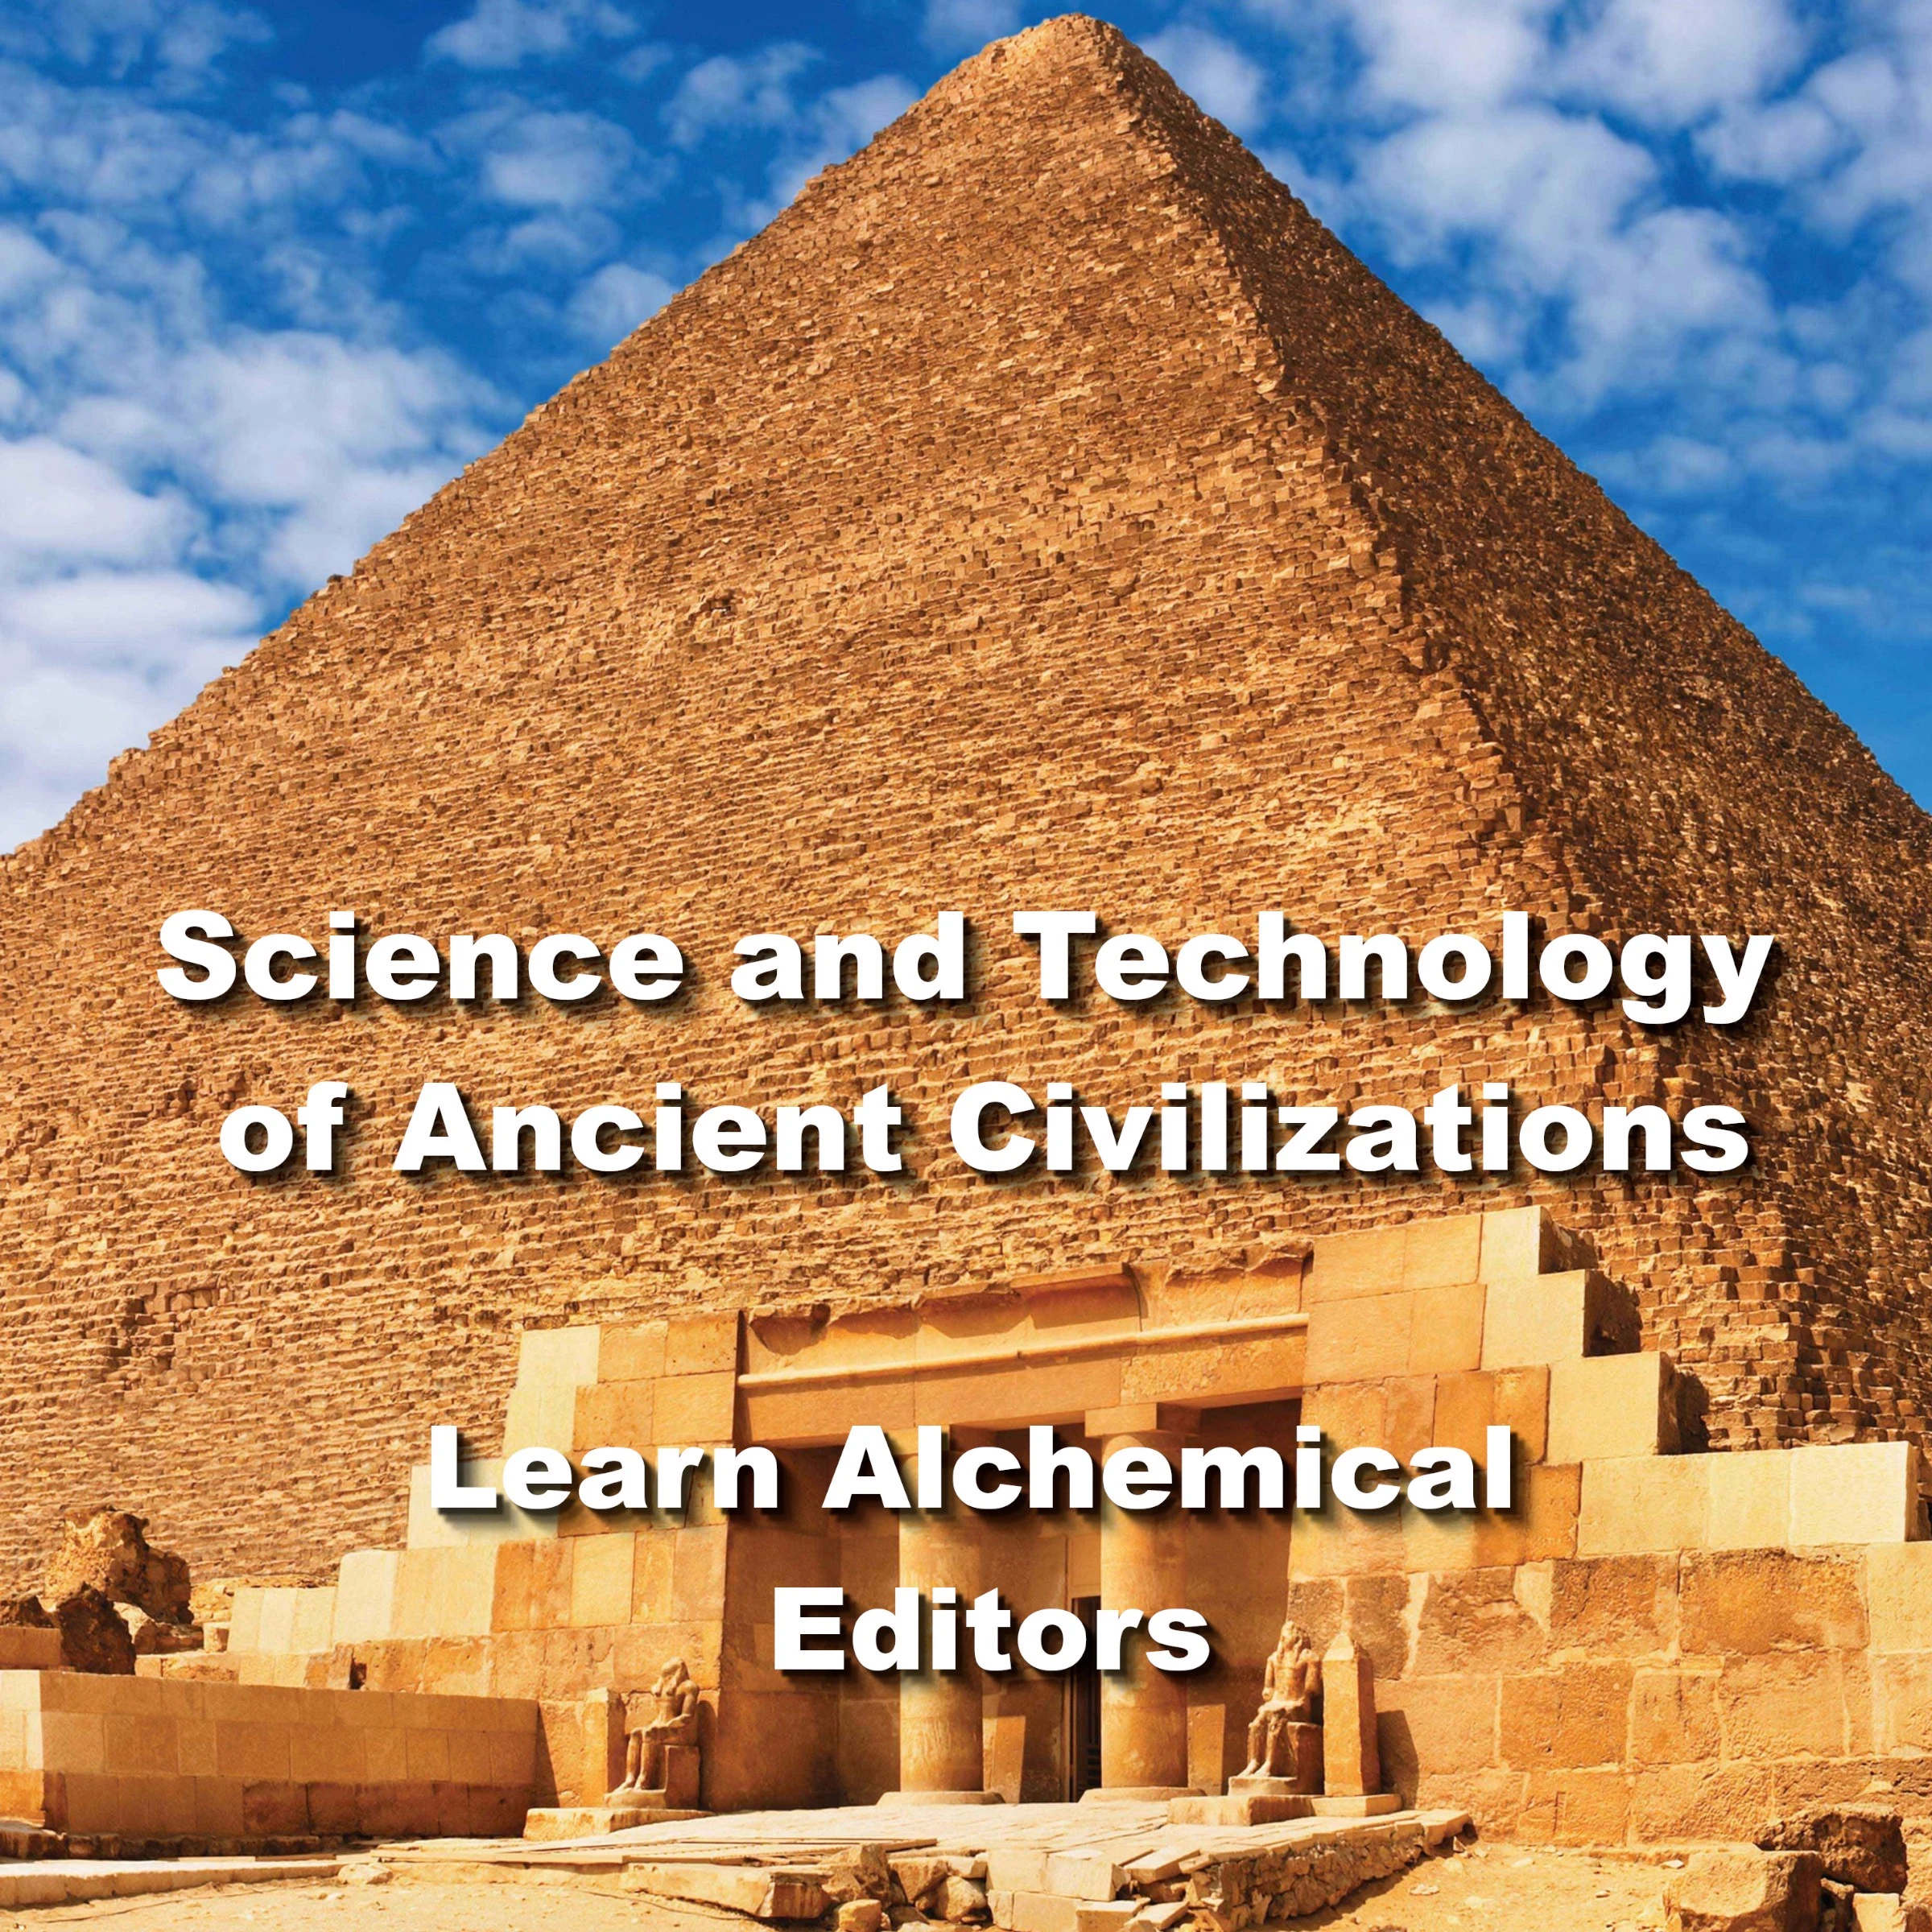 Science and Technology of Ancient Civilizations by Learn Alchemical Editors Audiobook